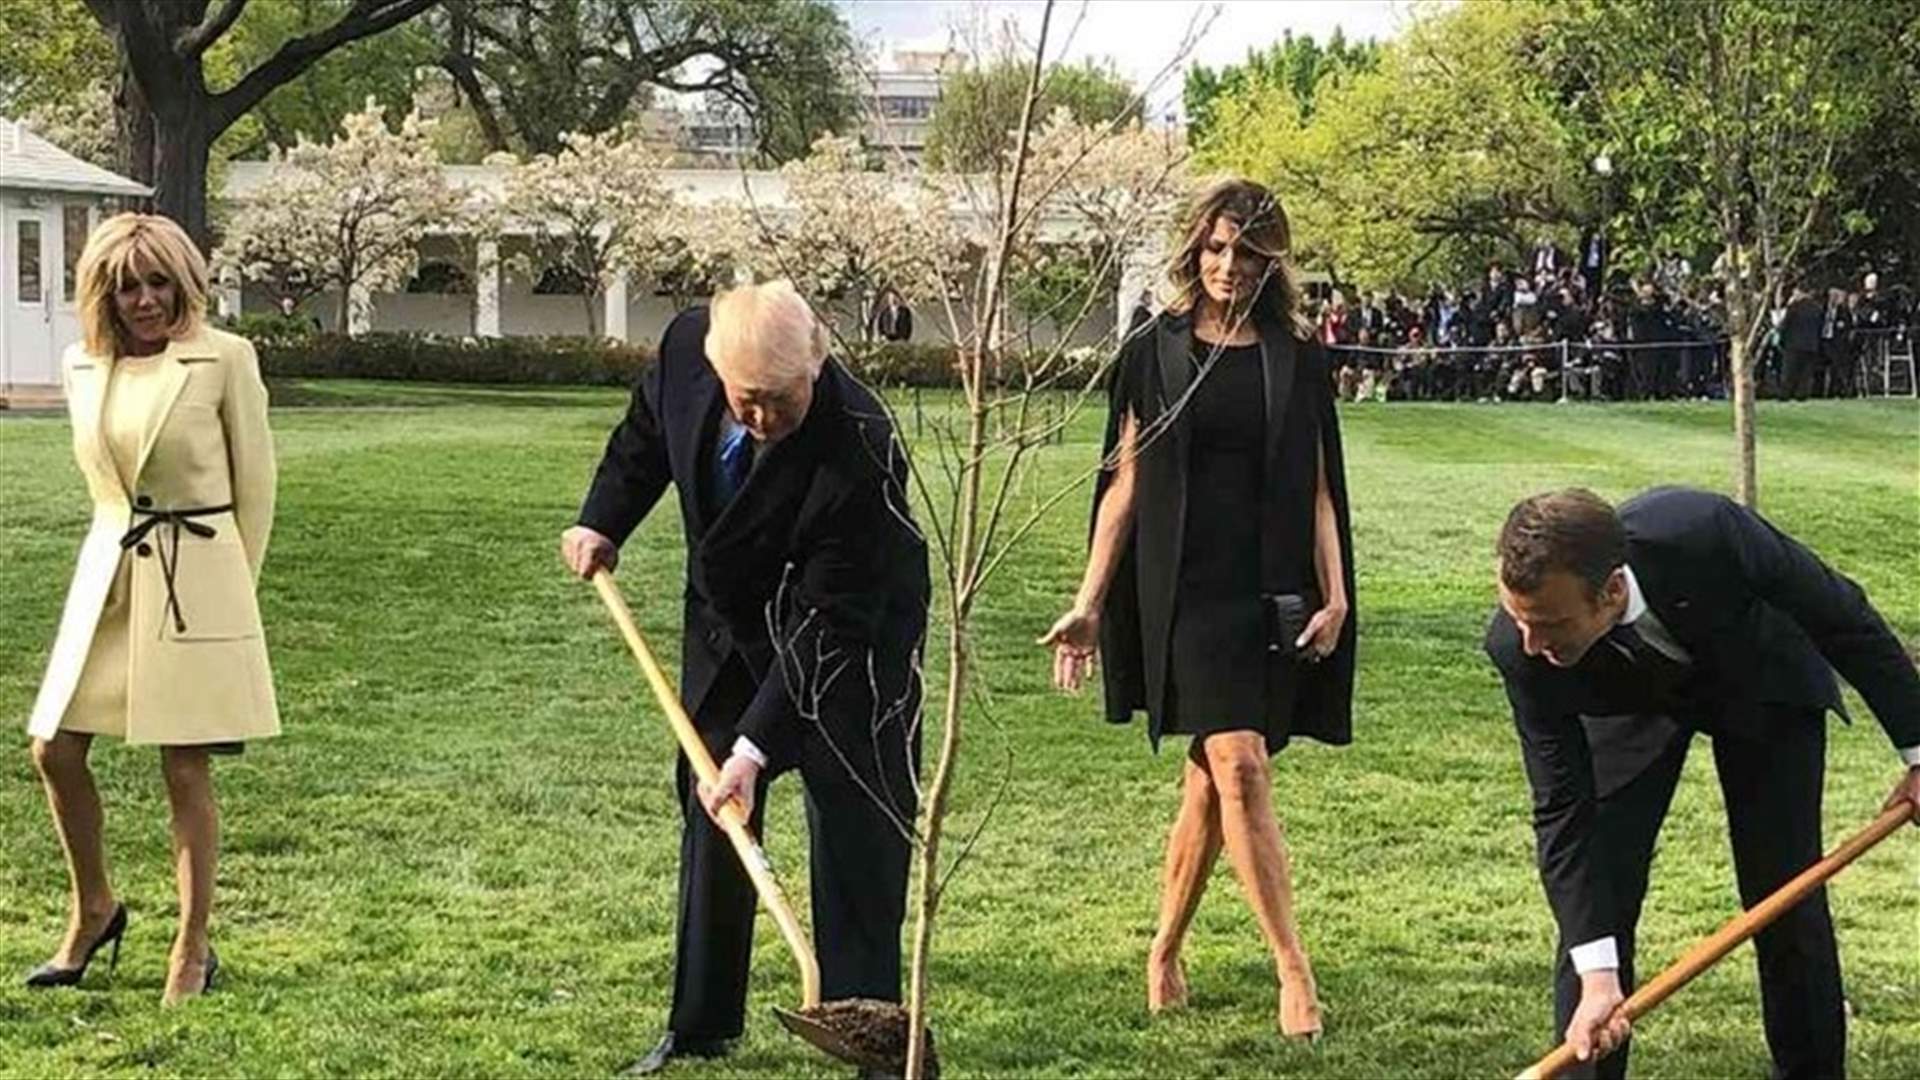 Macron And Trump Planted A Tree At The White House. Why It Is Now Missing